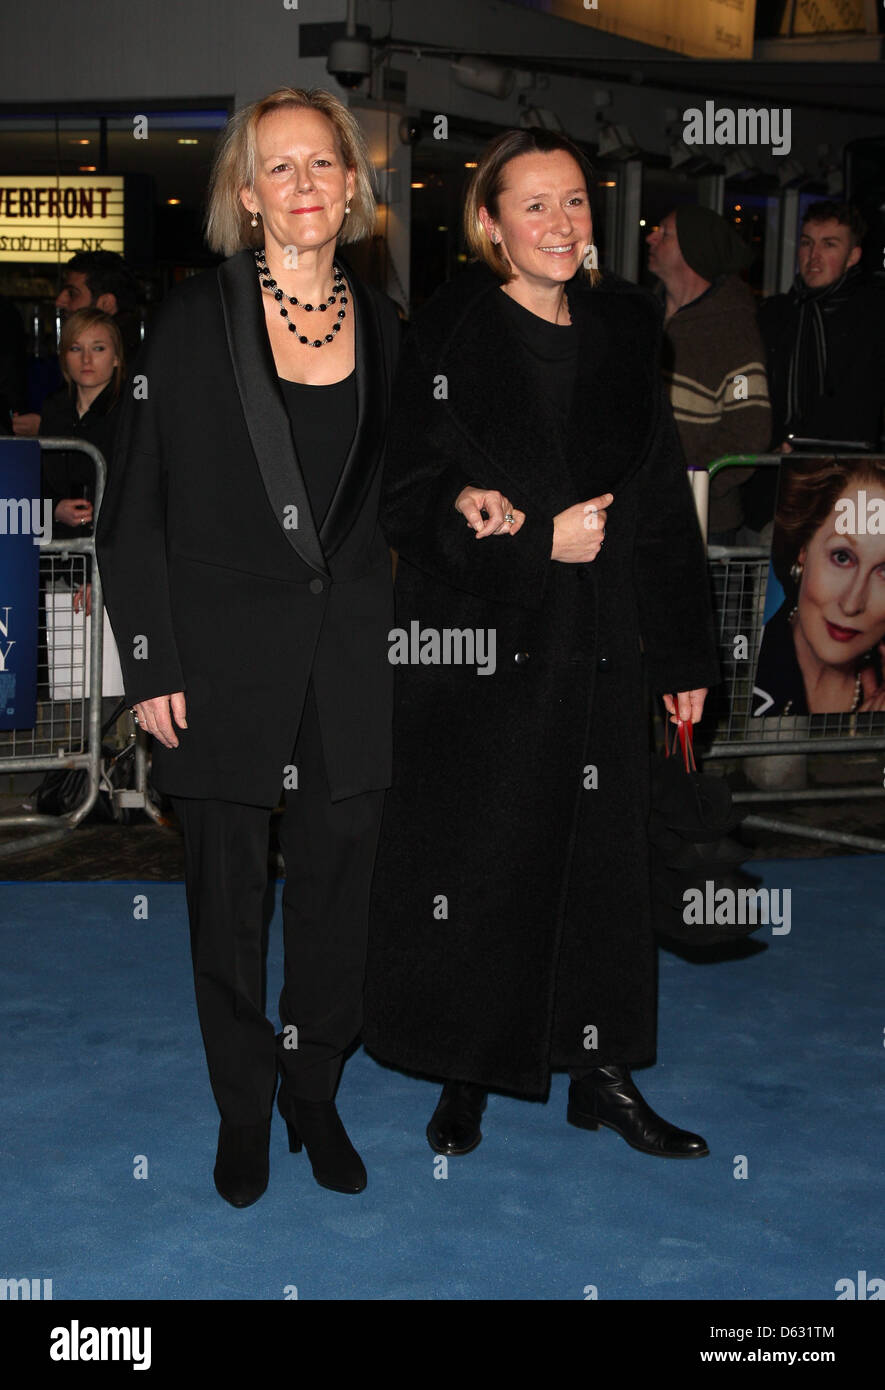 Phyllida Lloyd and Sarah Cooke 'The Iron Lady' UK film premiere held at the BFI Southbank - Arrivals London, England - 04.01.12 Stock Photo